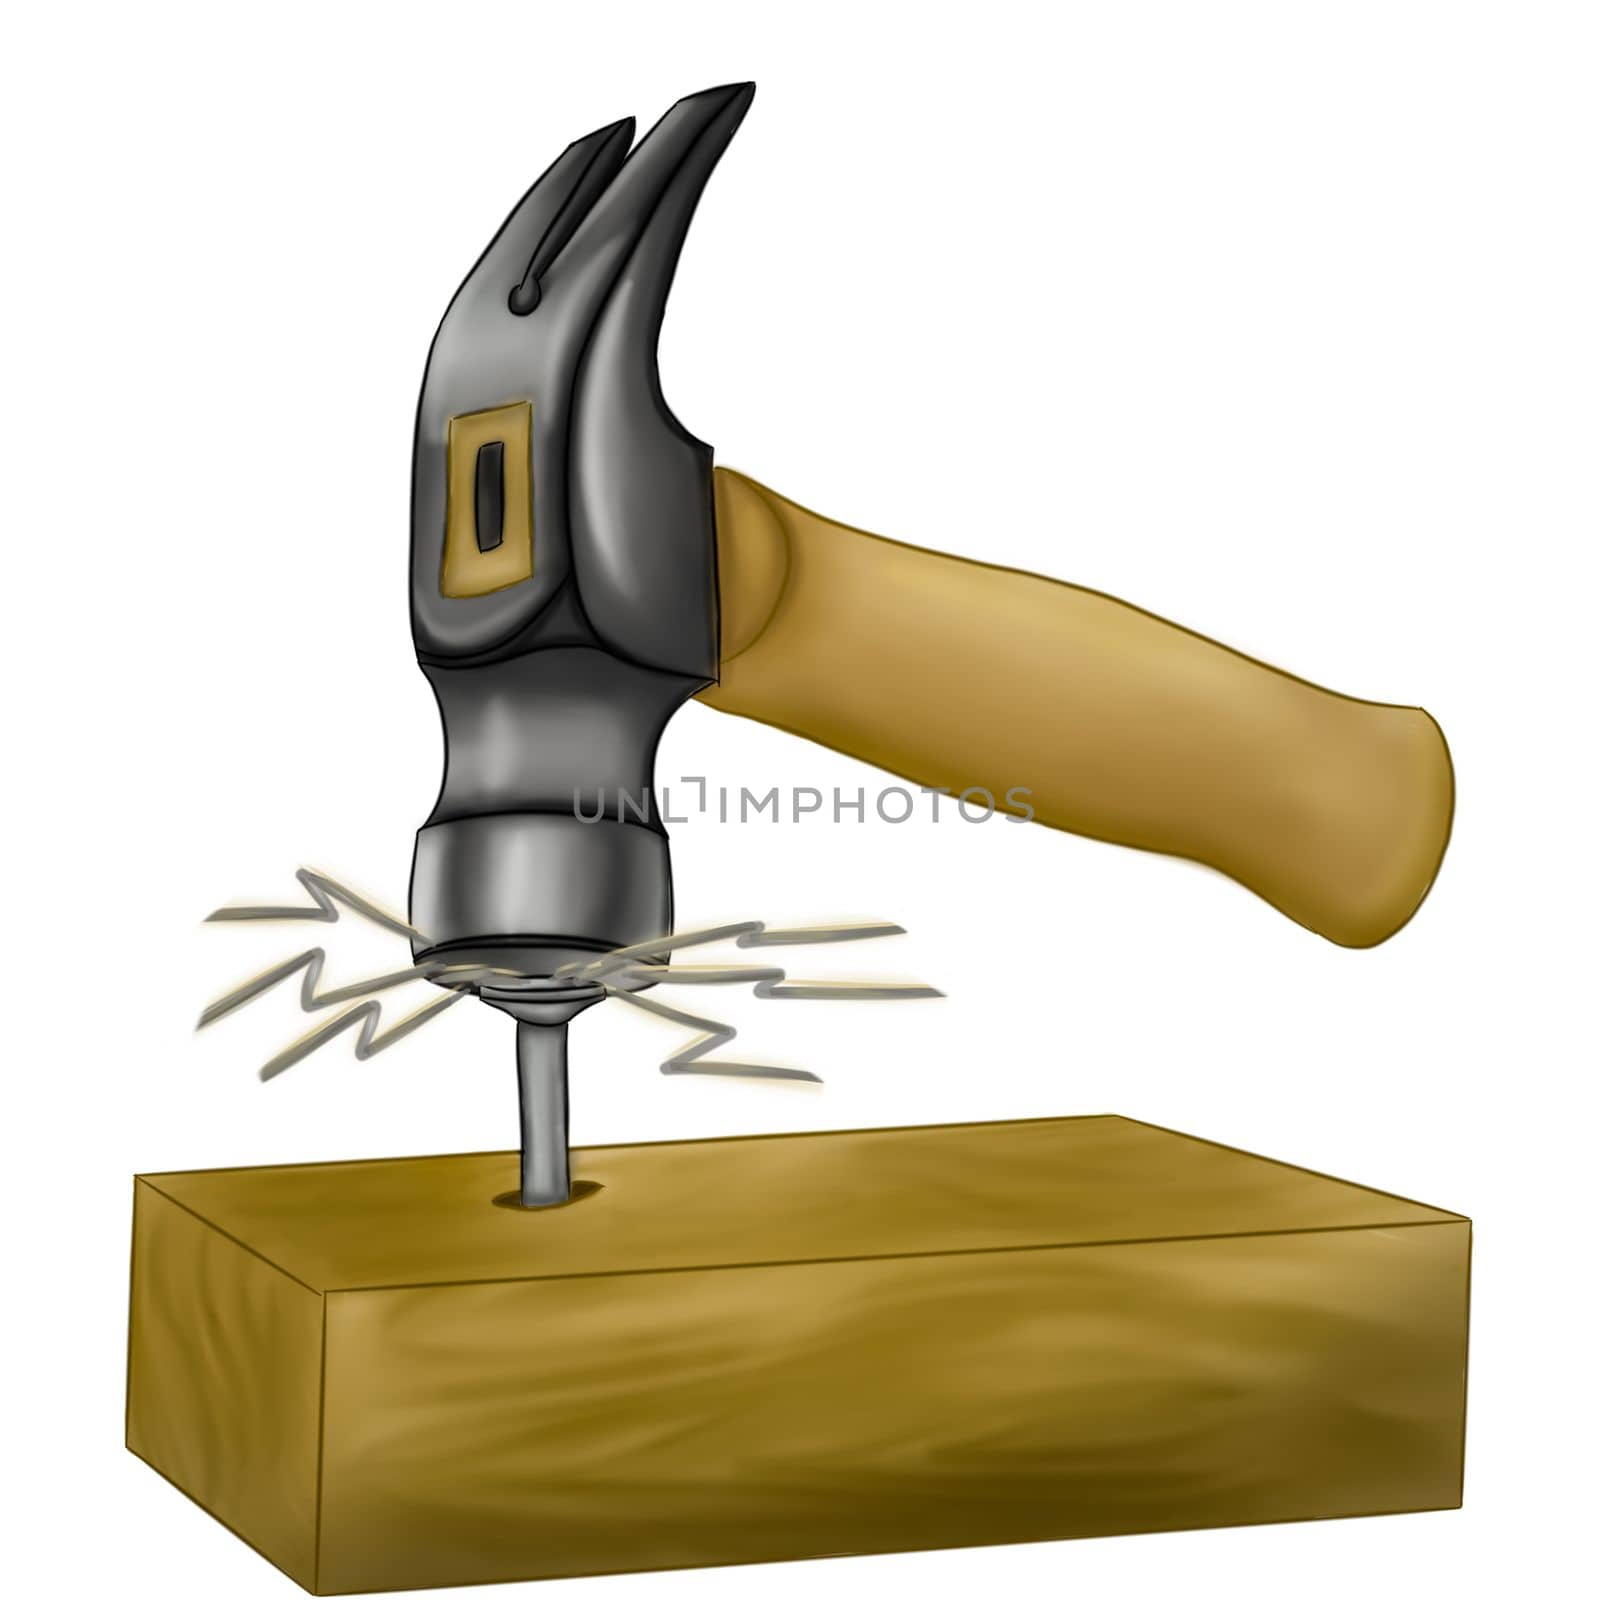 A hammer hammers a nail into a piece of wood on an isolated background. Clipart tools. a hammer